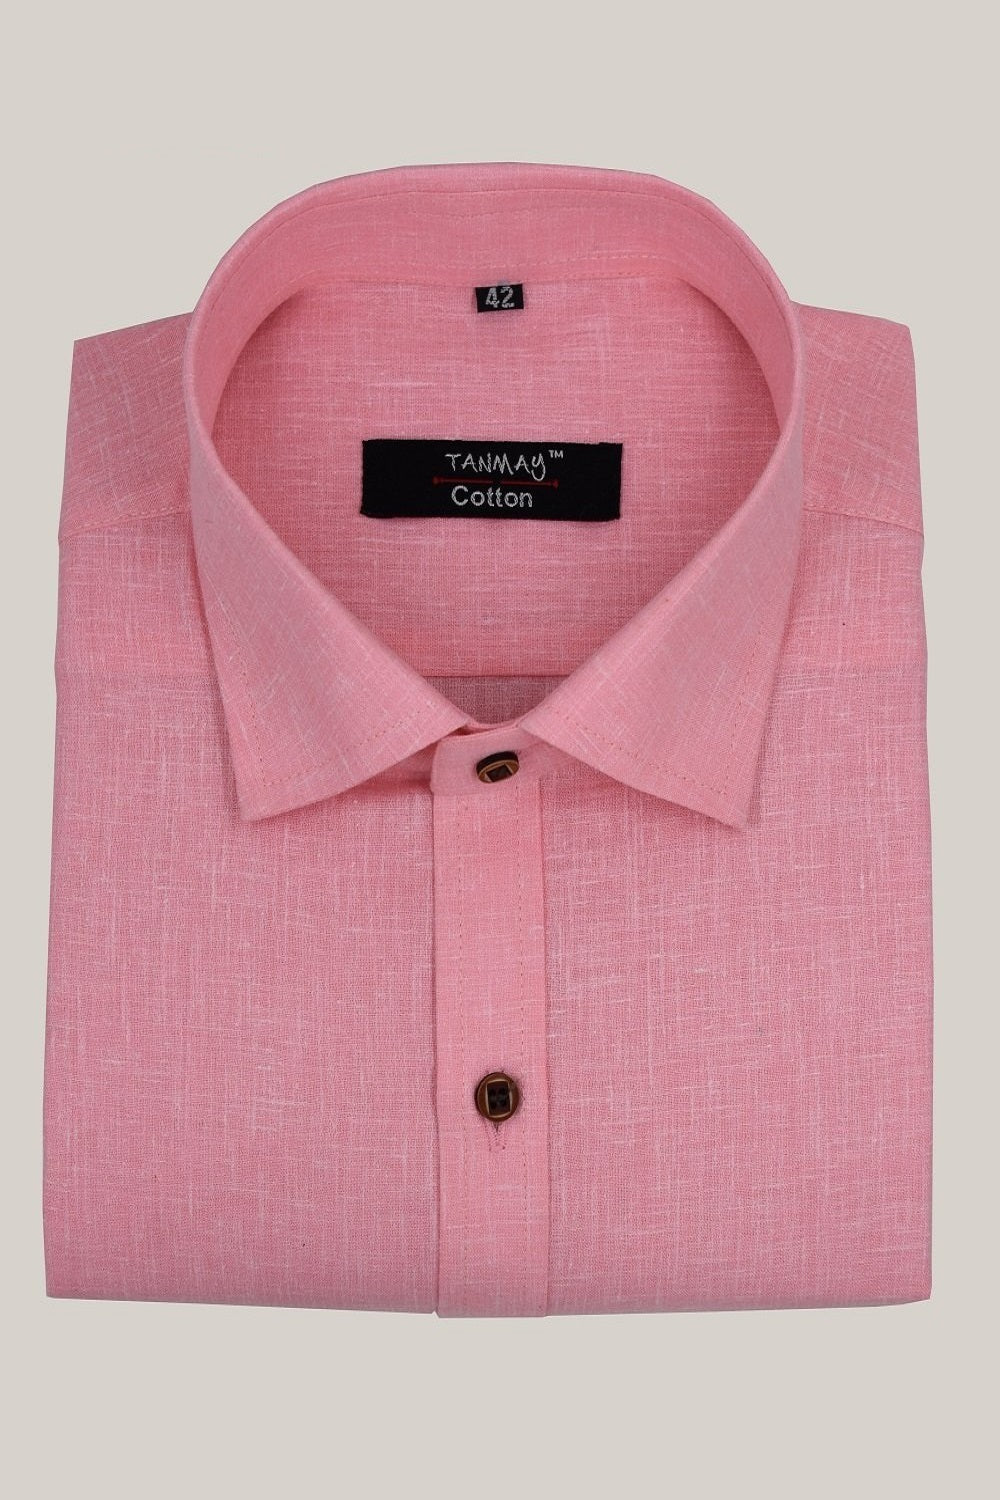 Cotton Tanmay Light Pink Color Linen Fill Formal Cotton Shirt For Men's